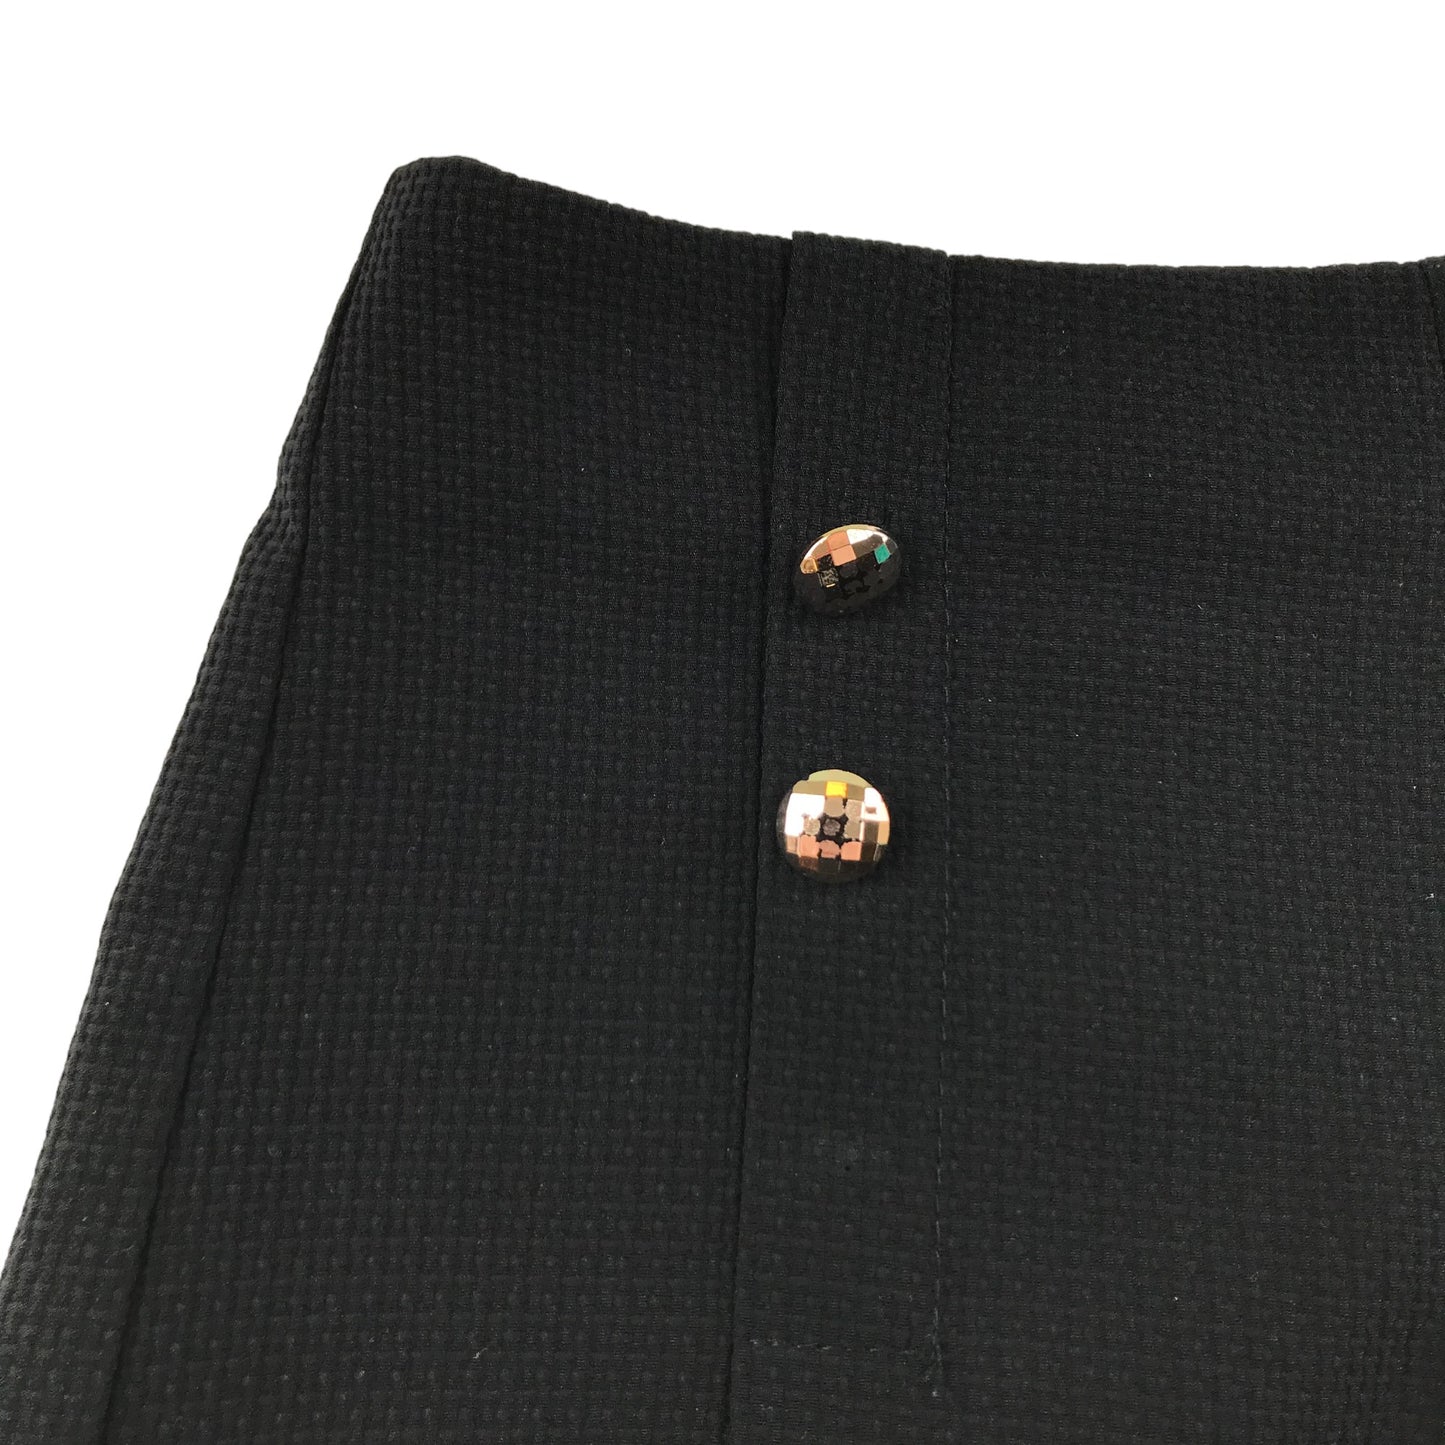 New Look Shorts Age 11 Black Button and pleat detail